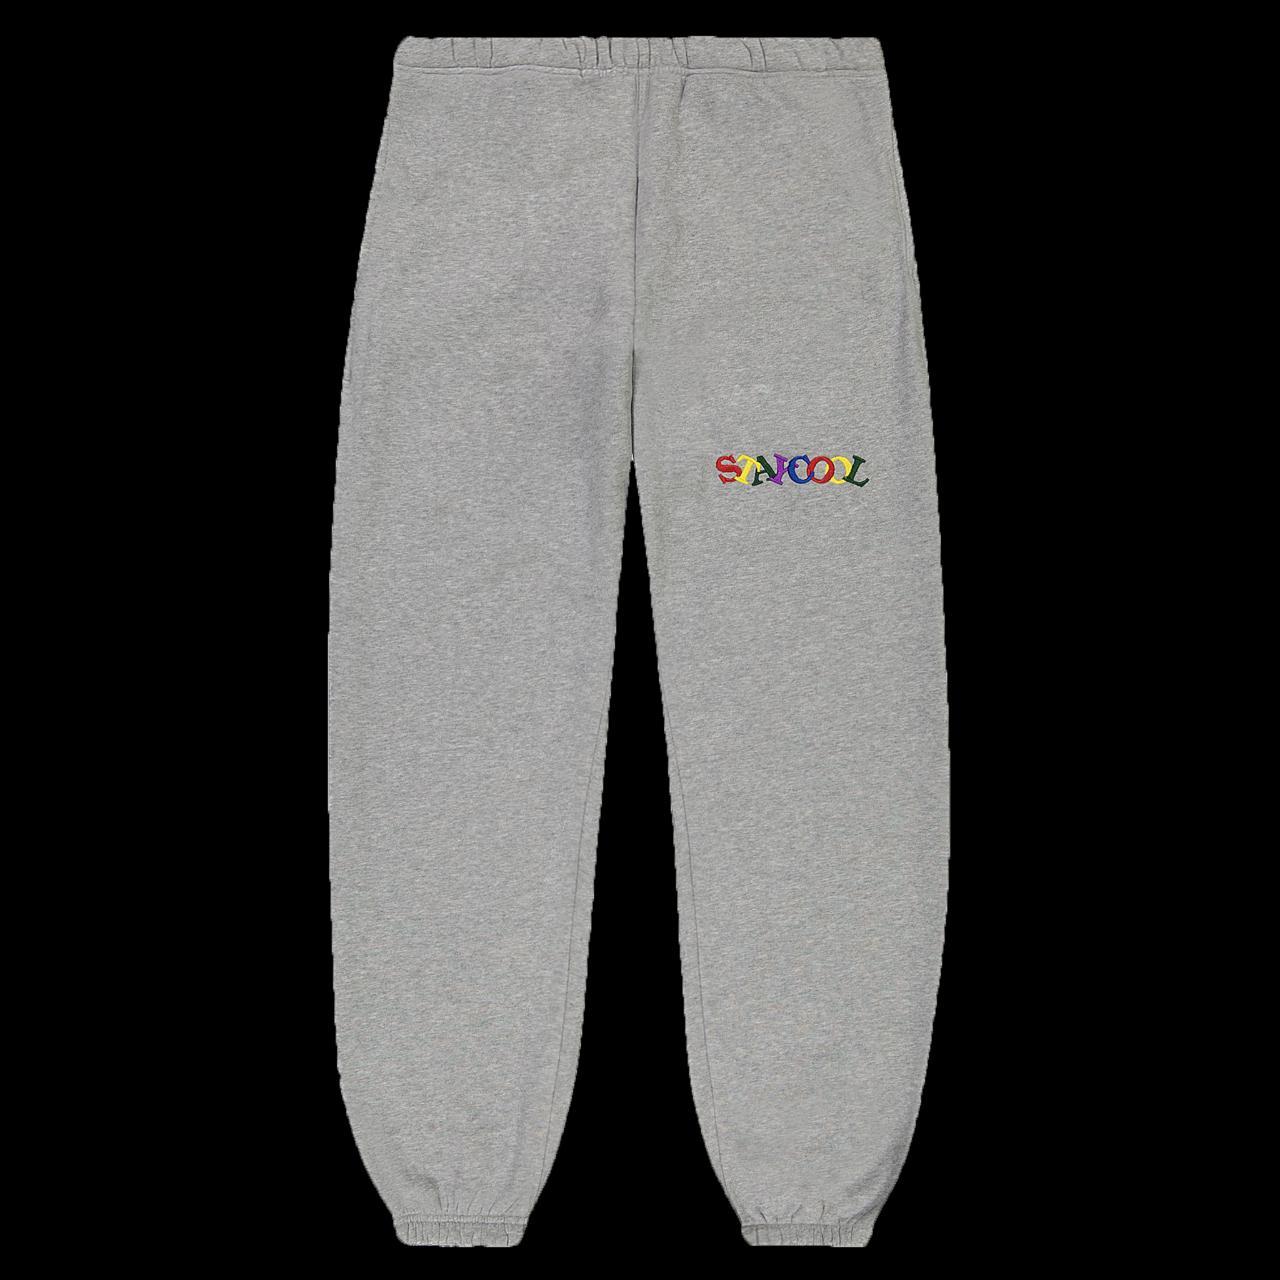 STAY COOL NYC Men's Grey Joggers-tracksuits (3)